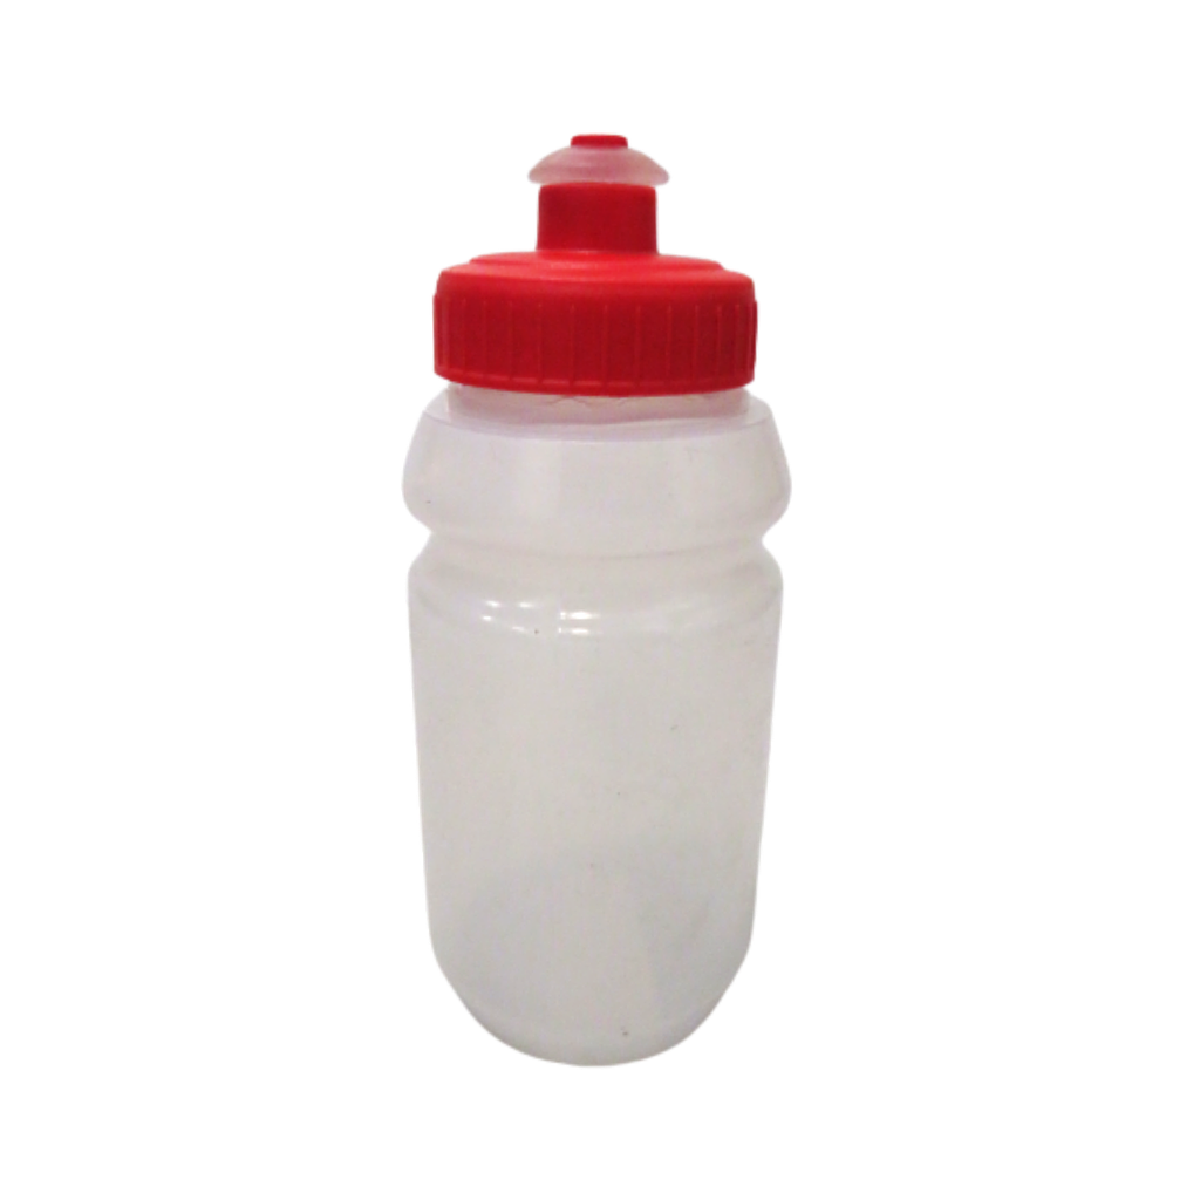 Standard 300ml Opaque with Red Cap